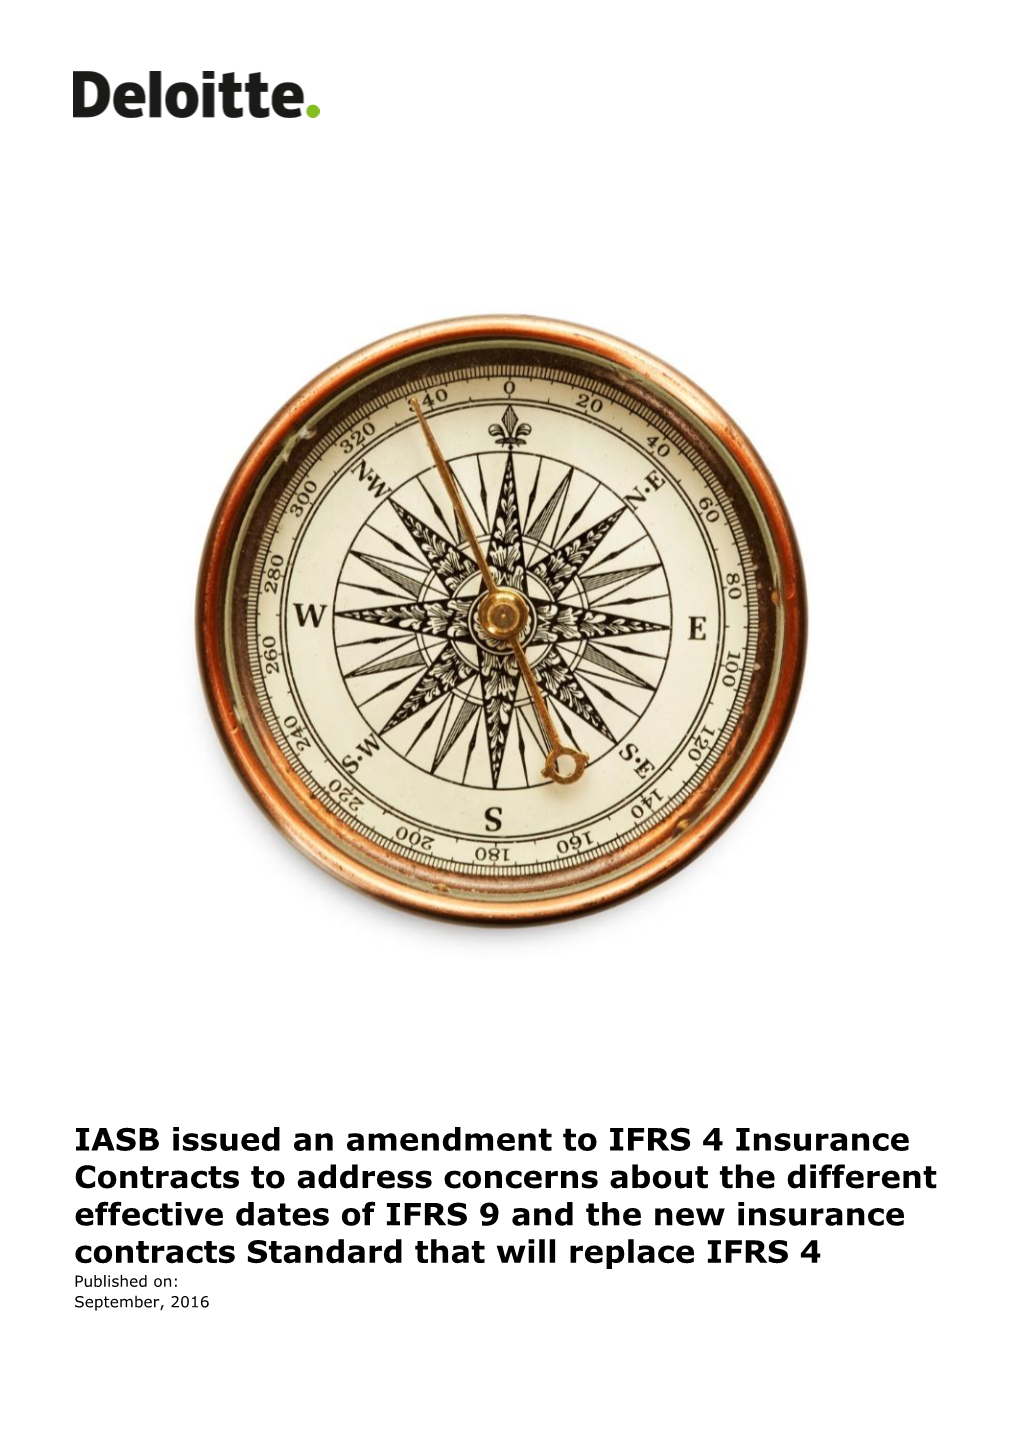 Download the PDF IASB Issued an Amendment to IFRS 4 Insurance